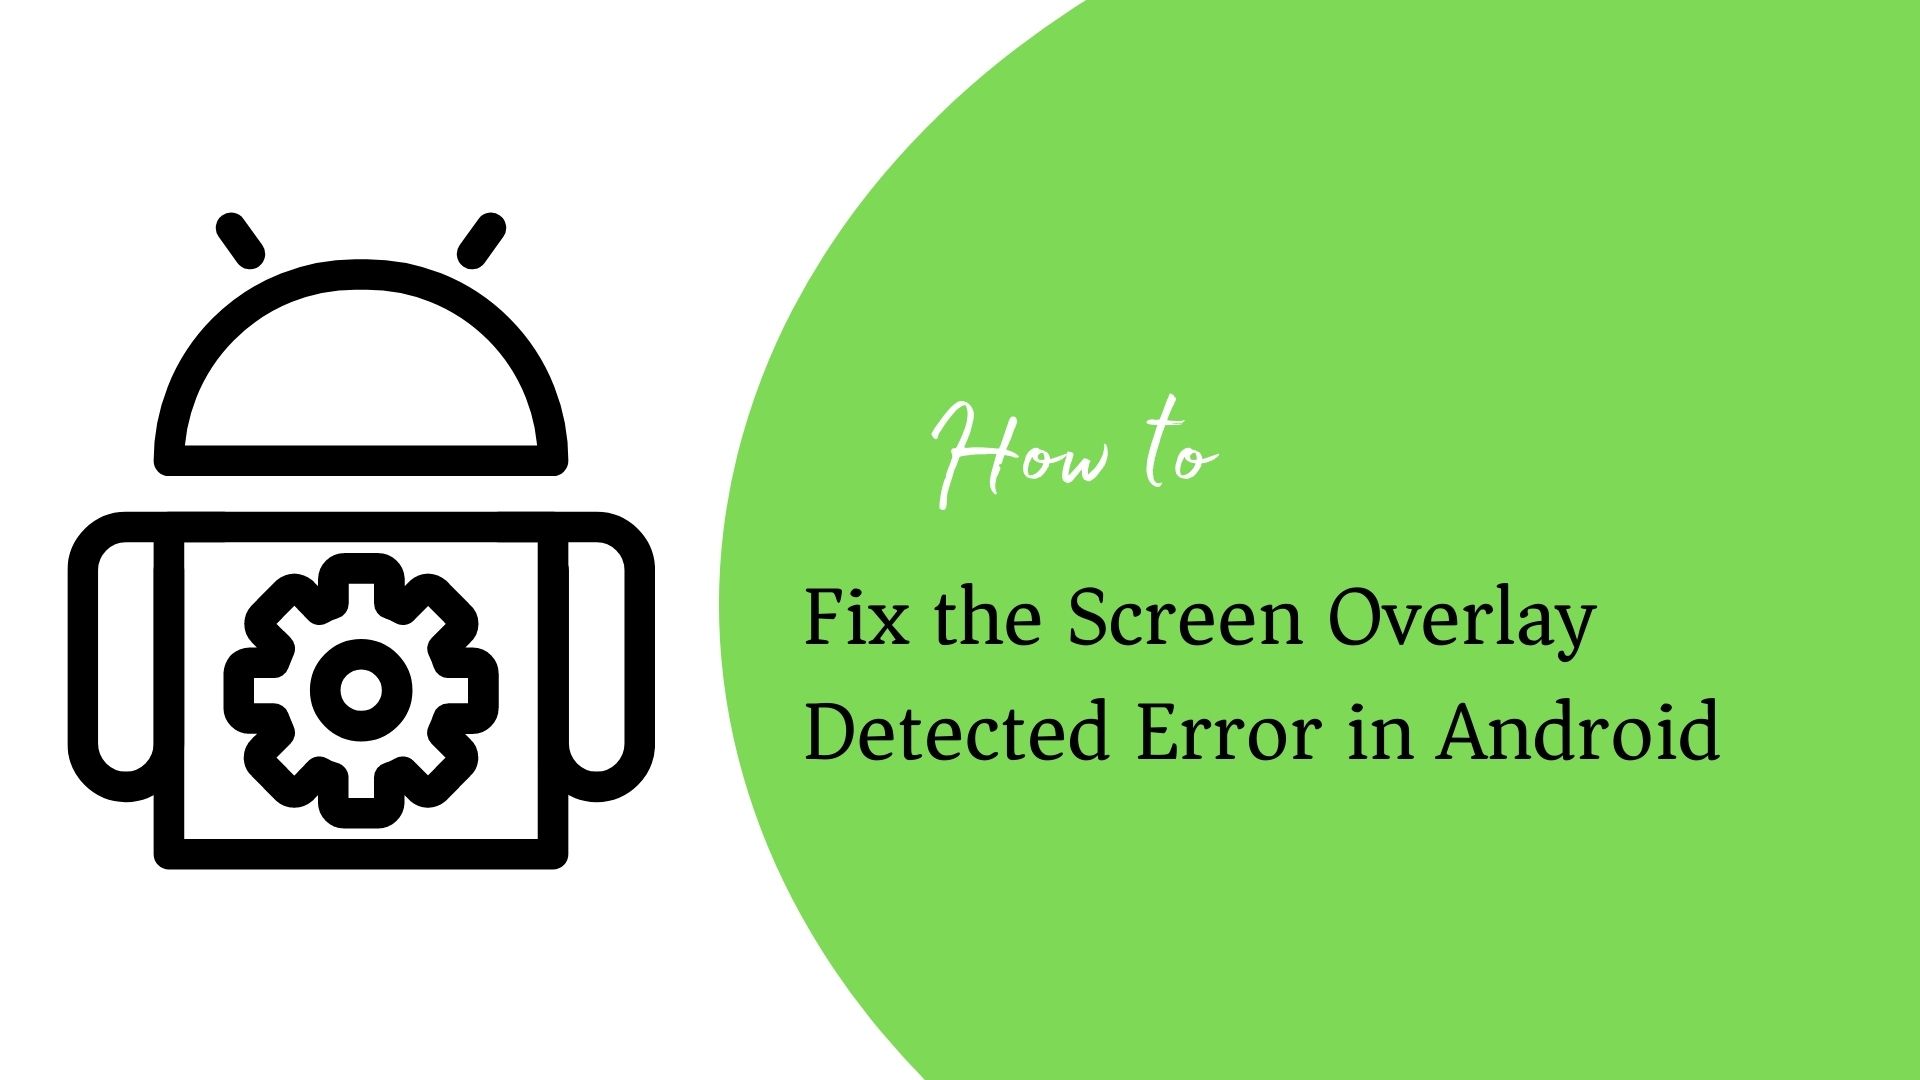 How to Fix the Screen Overlay Detected Error in Android